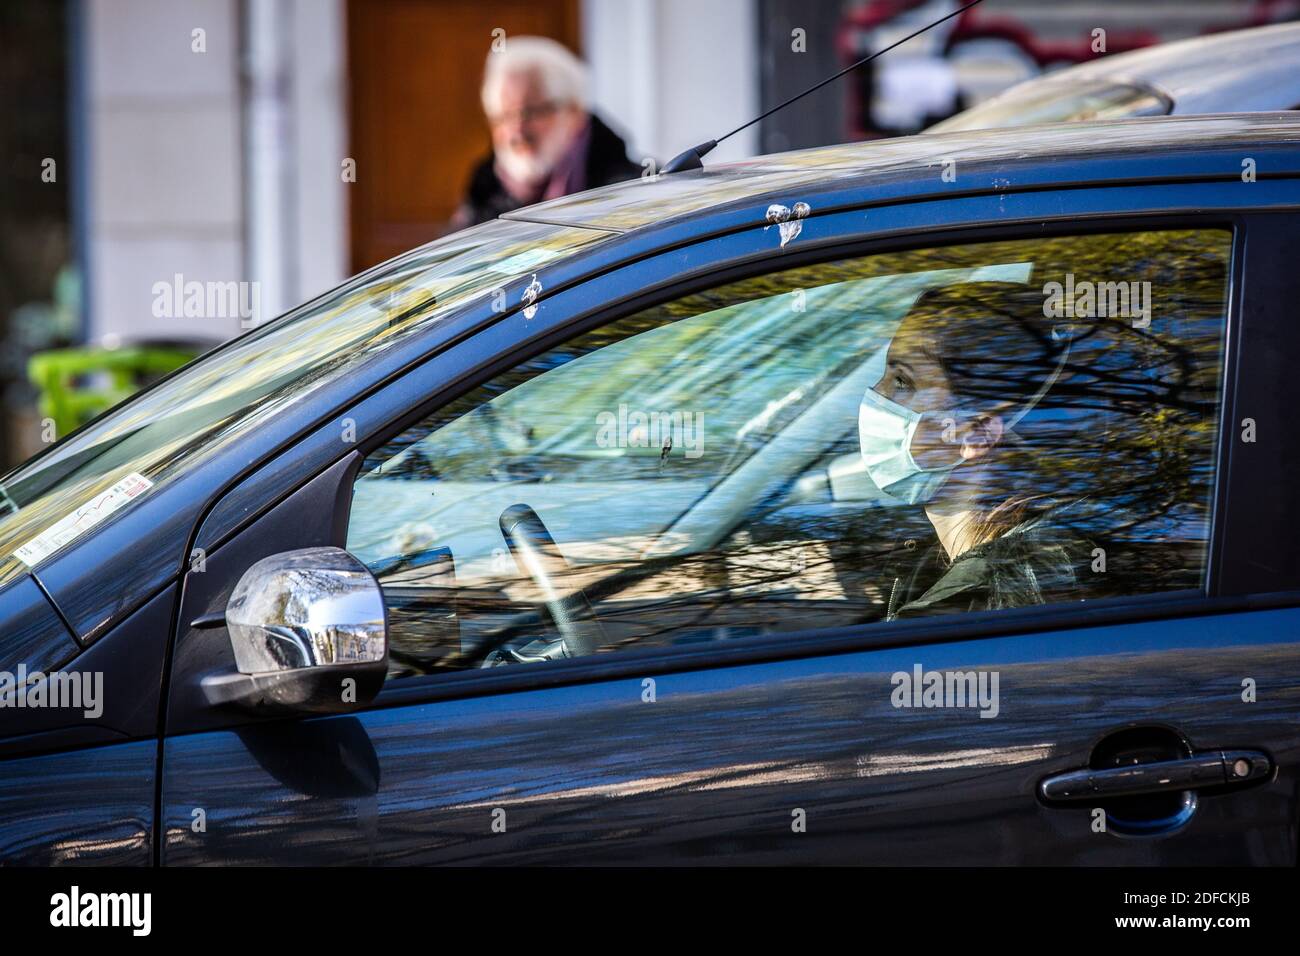 WOMAN, NURSE AT THE WHEEL OF HER CAR WEARING A MASK, COVID-19 PANDEMIC, PARIS, FRANCE, EUROPE Stock Photo